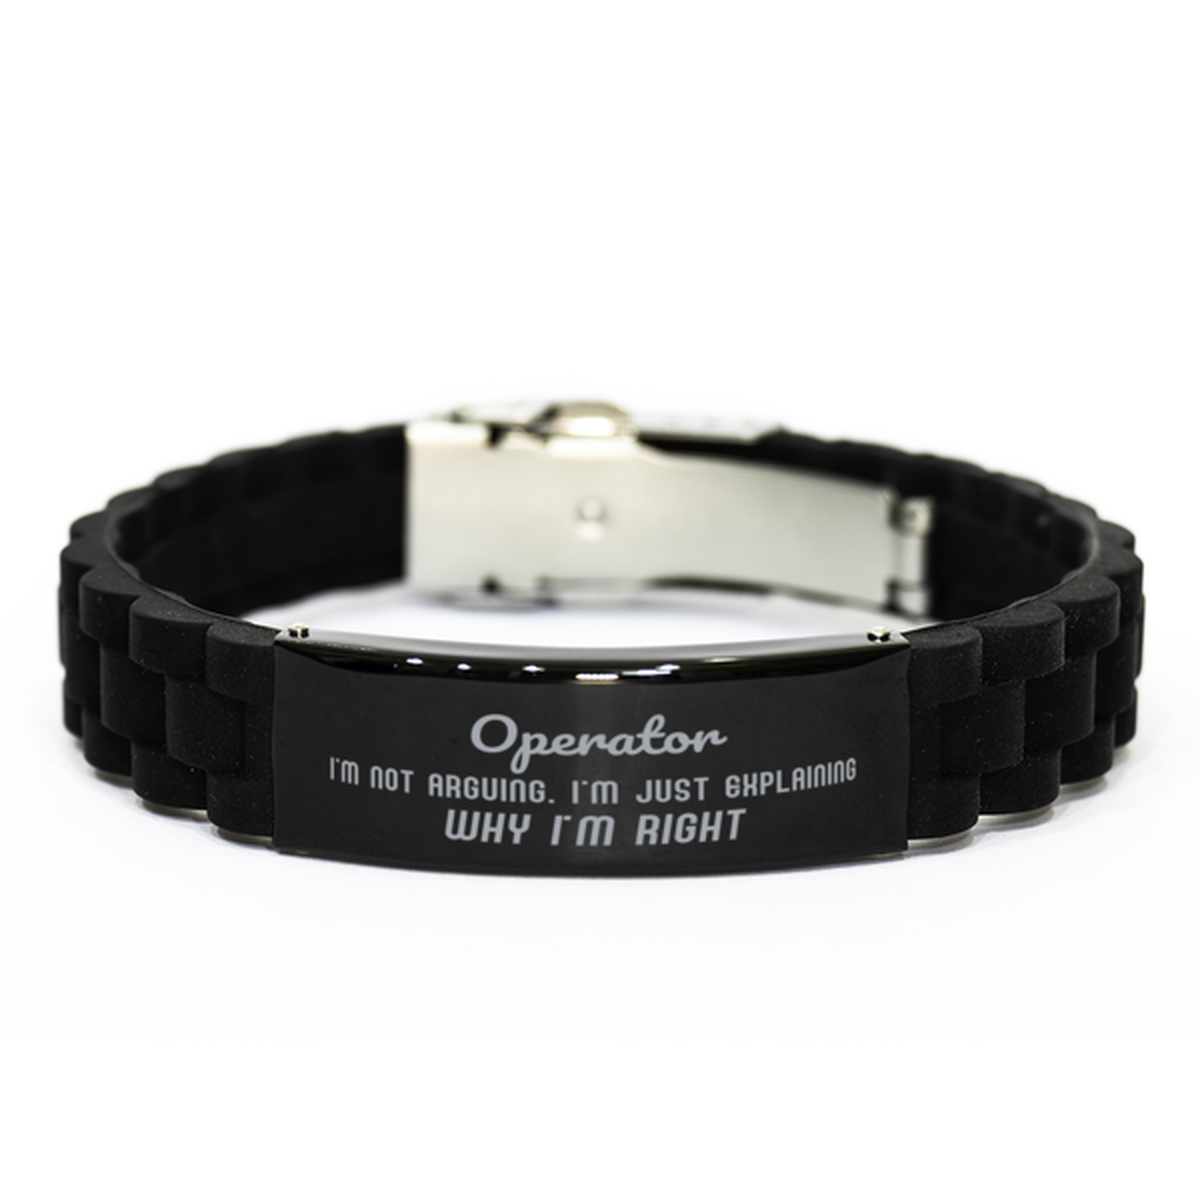 Operator I'm not Arguing. I'm Just Explaining Why I'm RIGHT Black Glidelock Clasp Bracelet, Funny Saying Quote Operator Gifts For Operator Graduation Birthday Christmas Gifts for Men Women Coworker